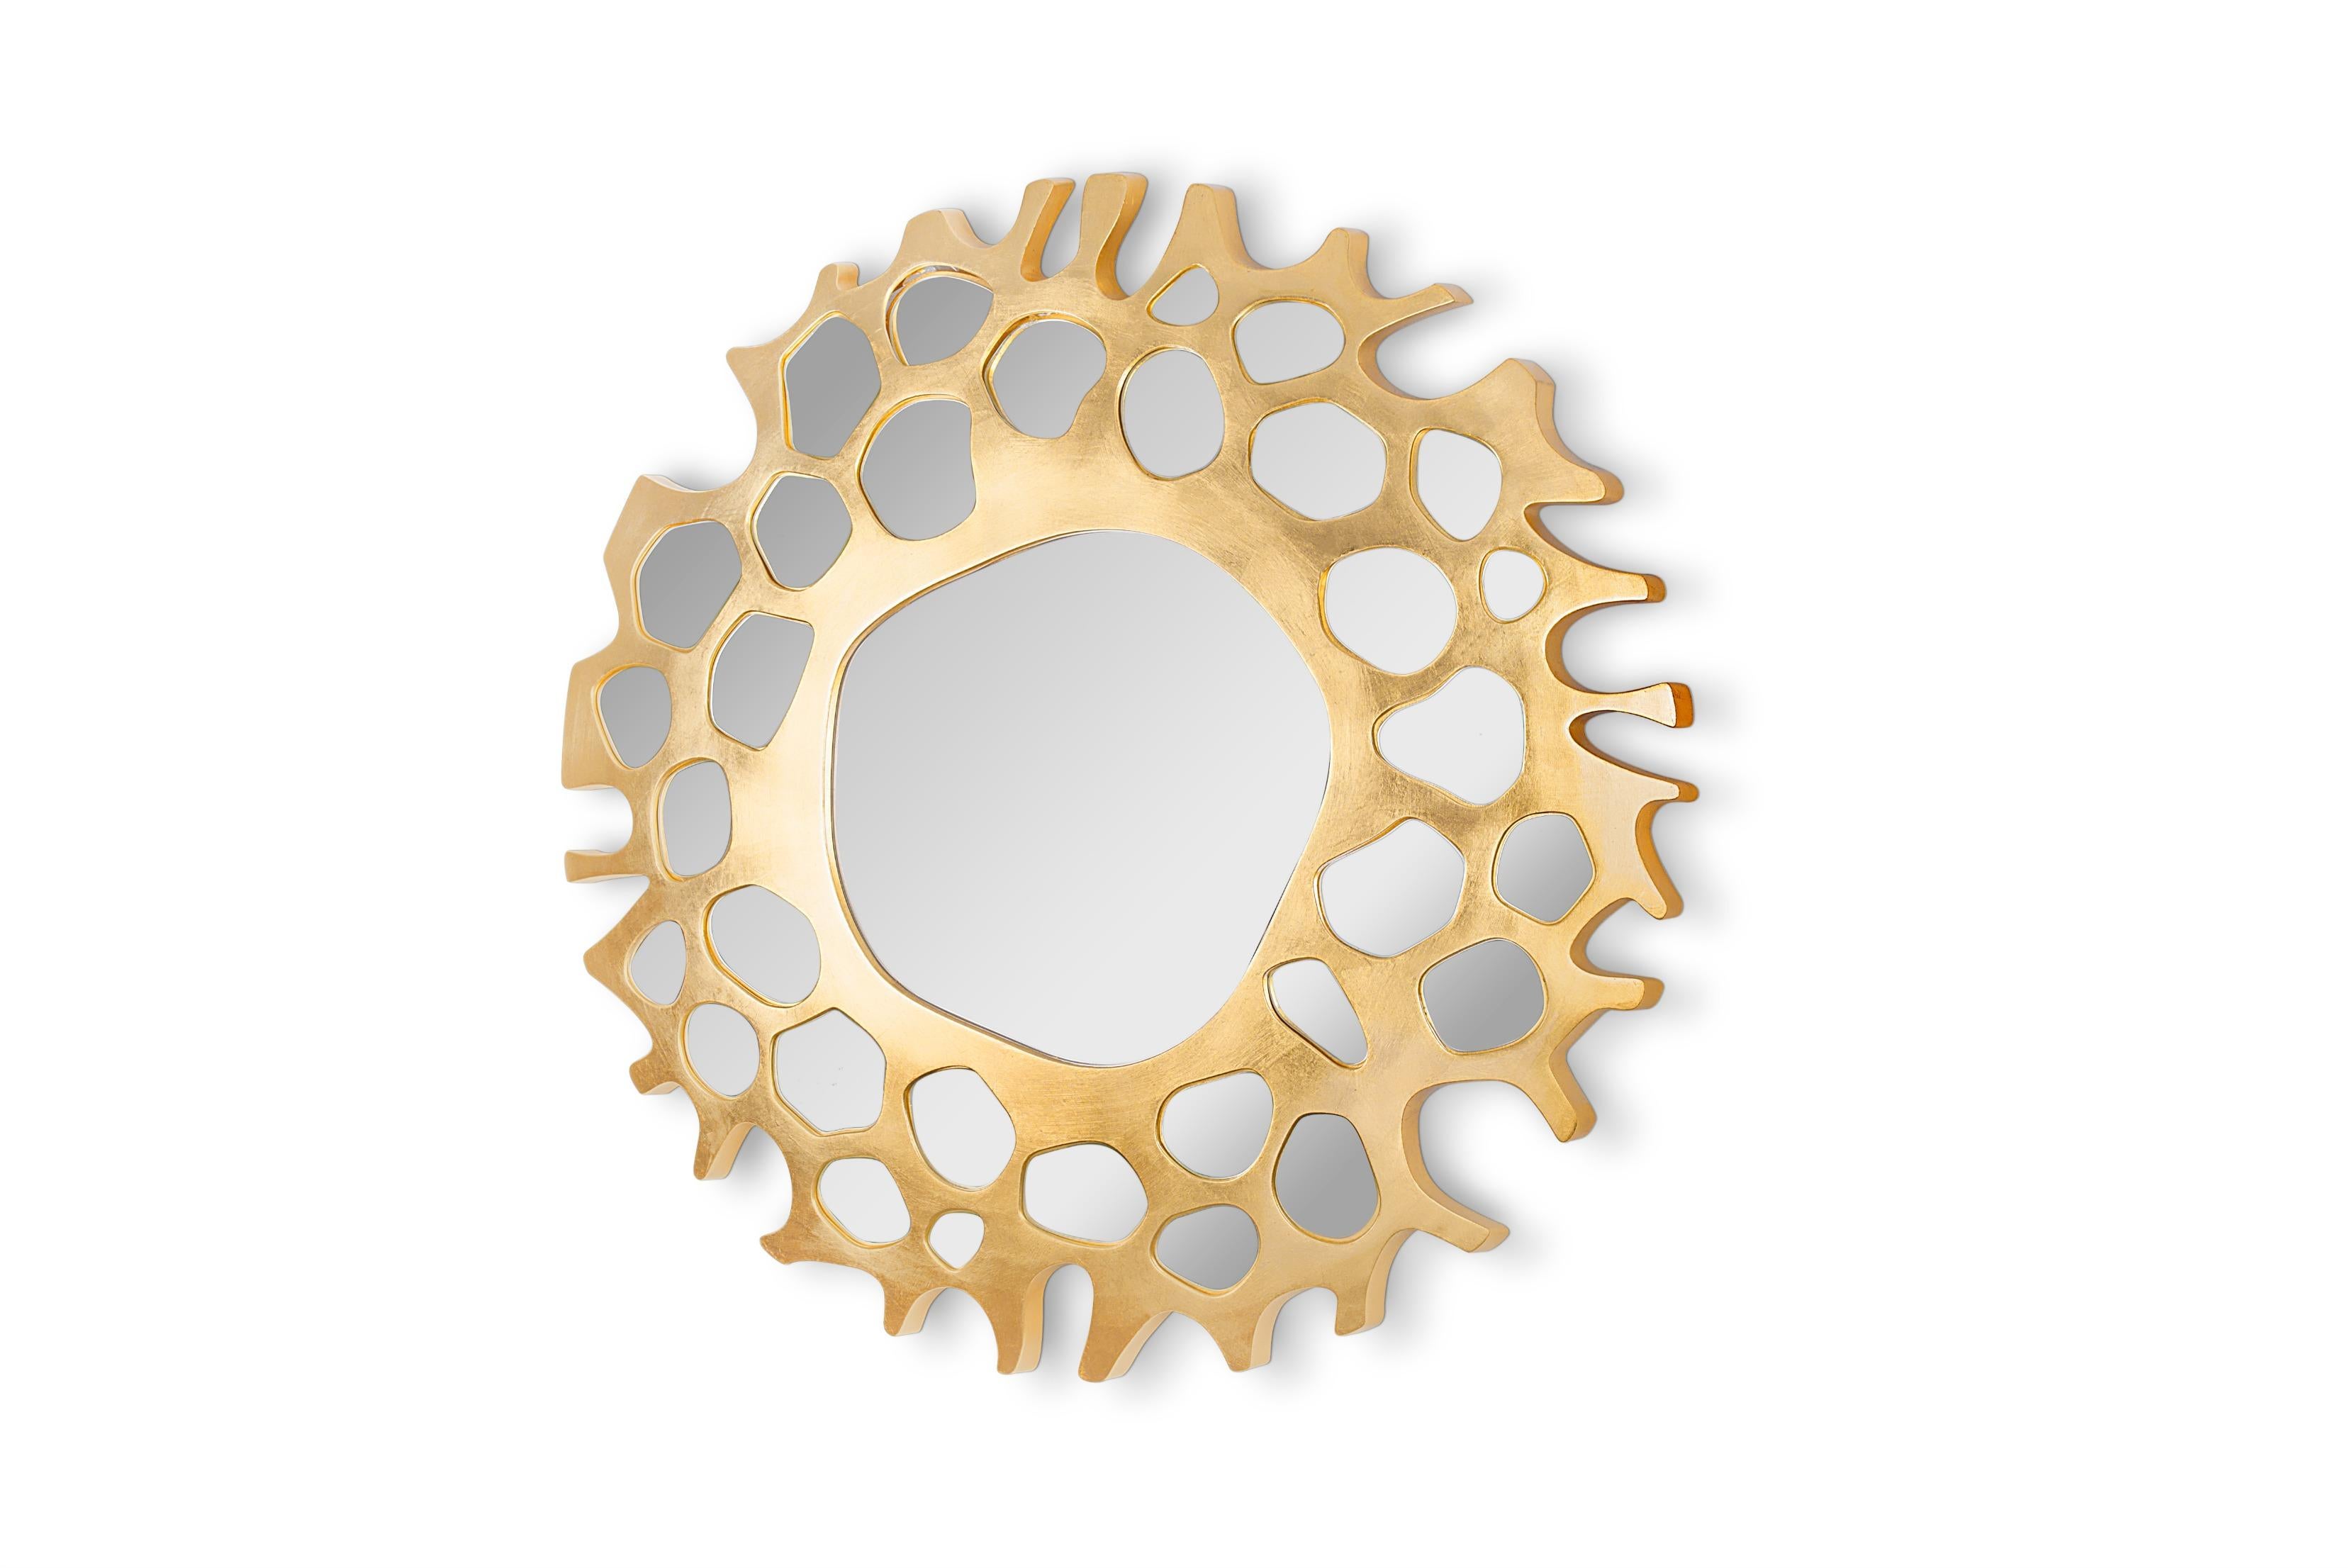 In Greek Mythology, Helios was the personification of the Sun. It is said that each dawn, he rose from the far ends of the earth with the shining aureole of the Sun. This inspired the creation of Helios mirror. With a finish in golden leaf, this